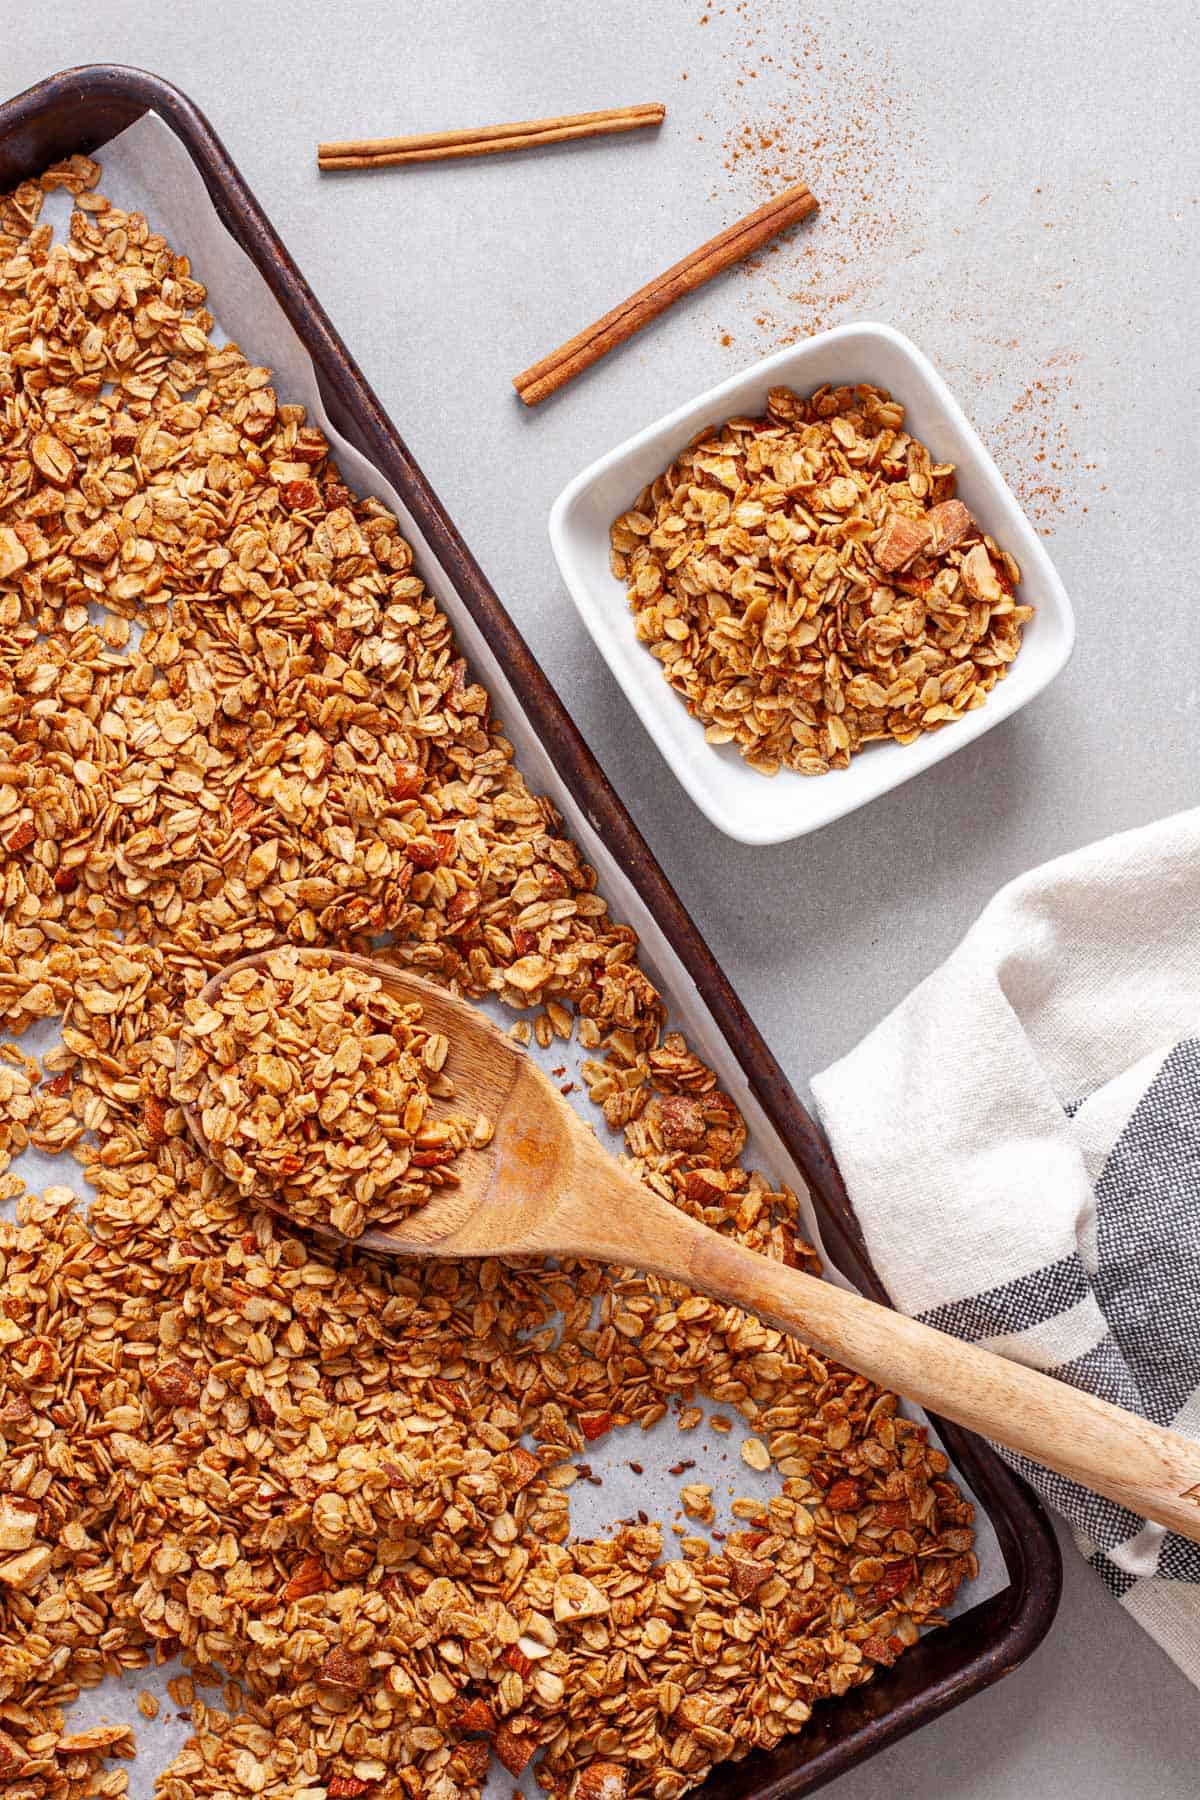 A wooden spoon on a sheet pan of homemade granola serving the granola into a small white bowl.